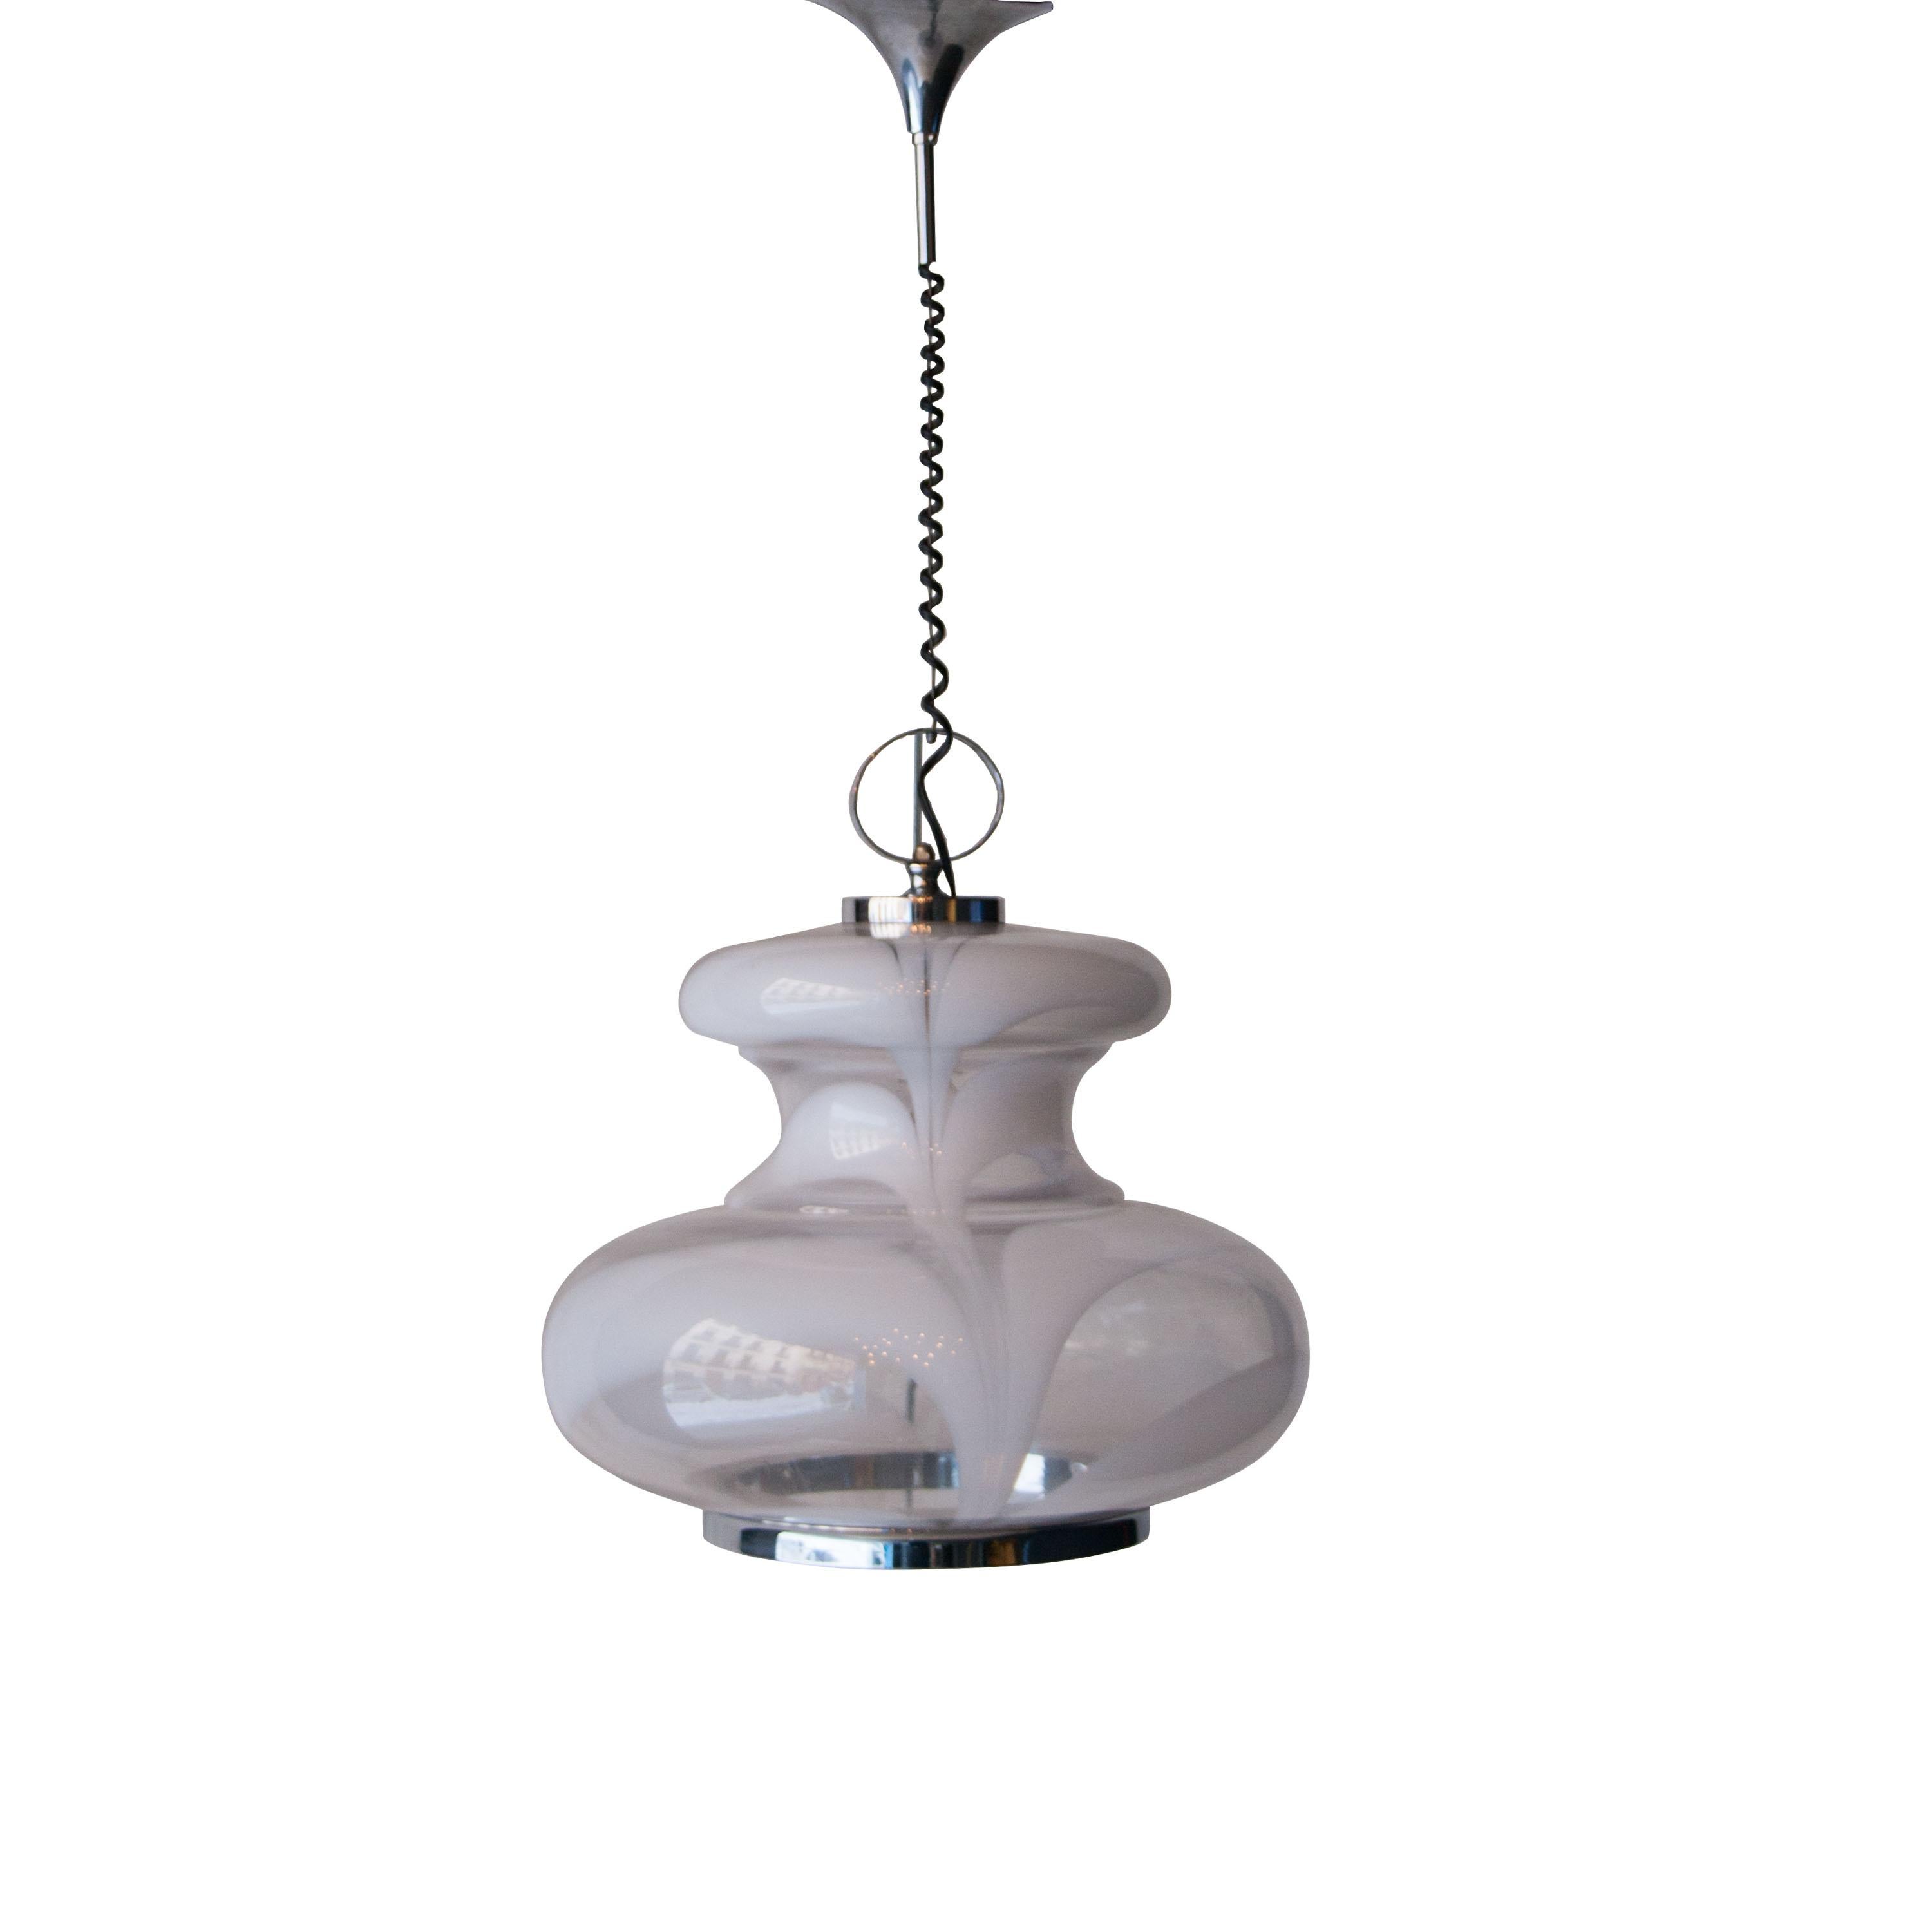 Hanging lamp made in chromed steel structure with Murano glass lamp shade.